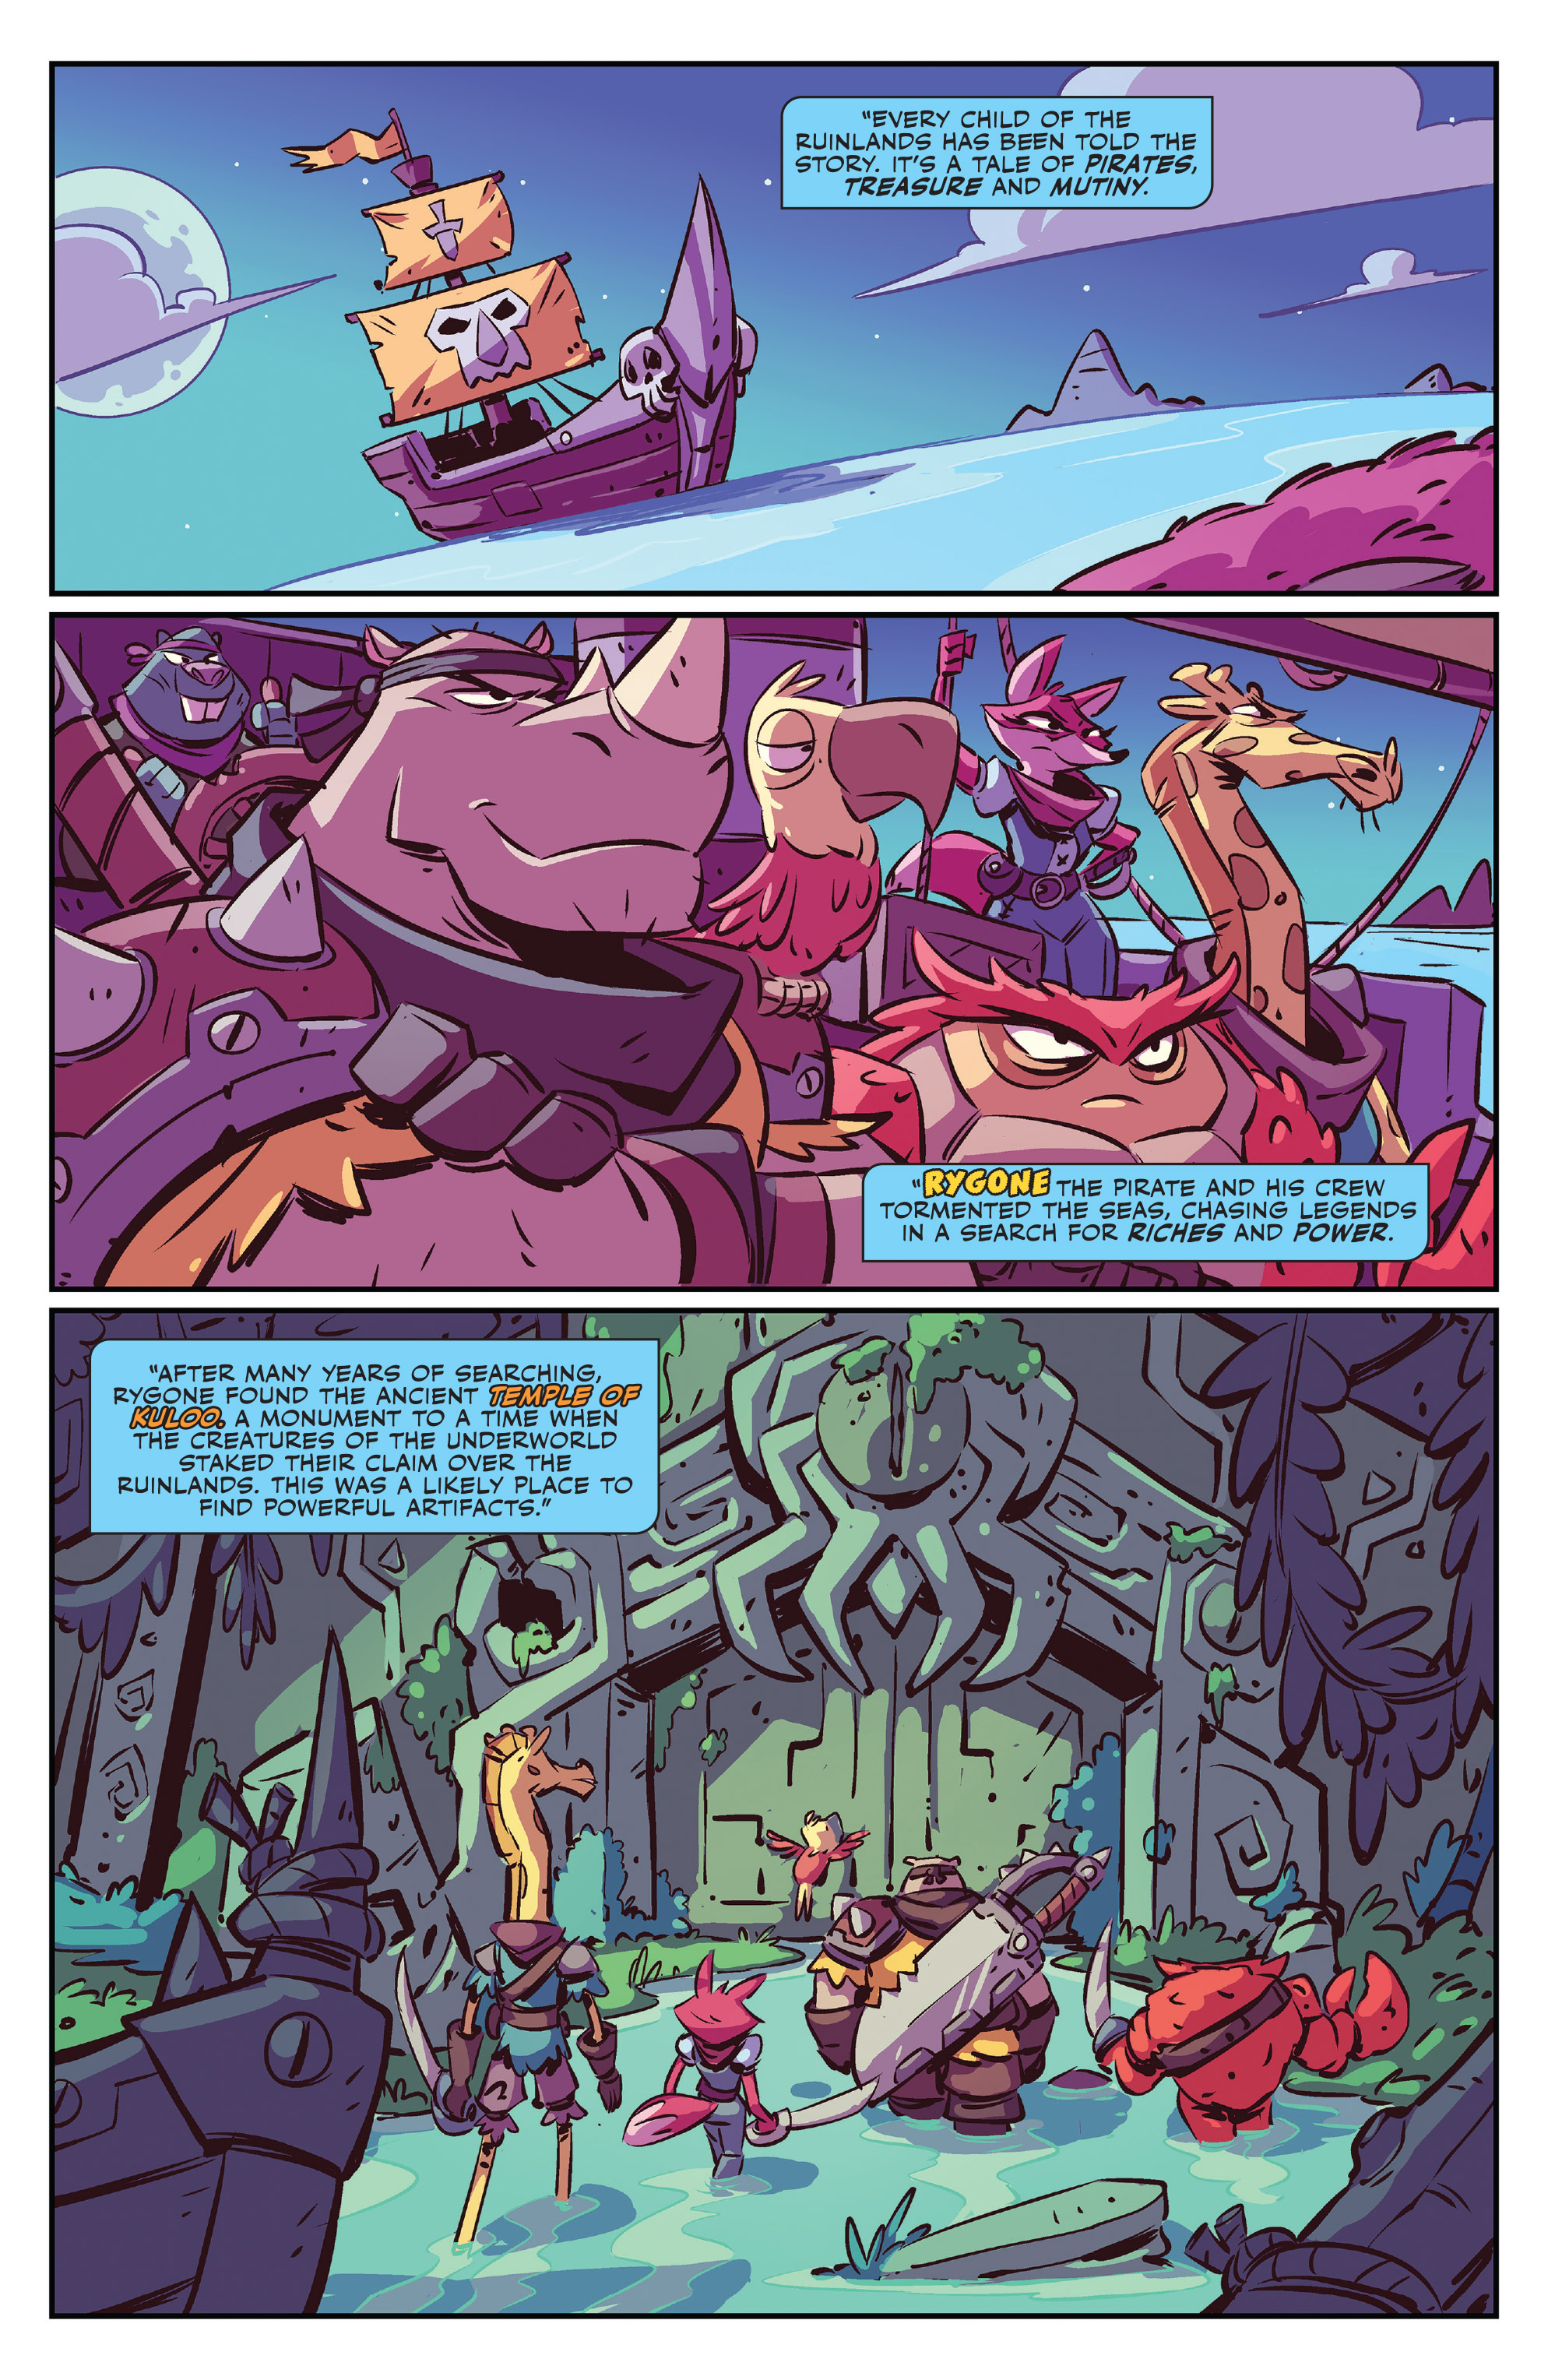 RuinWorld (2018-): Chapter 4 - Page 3